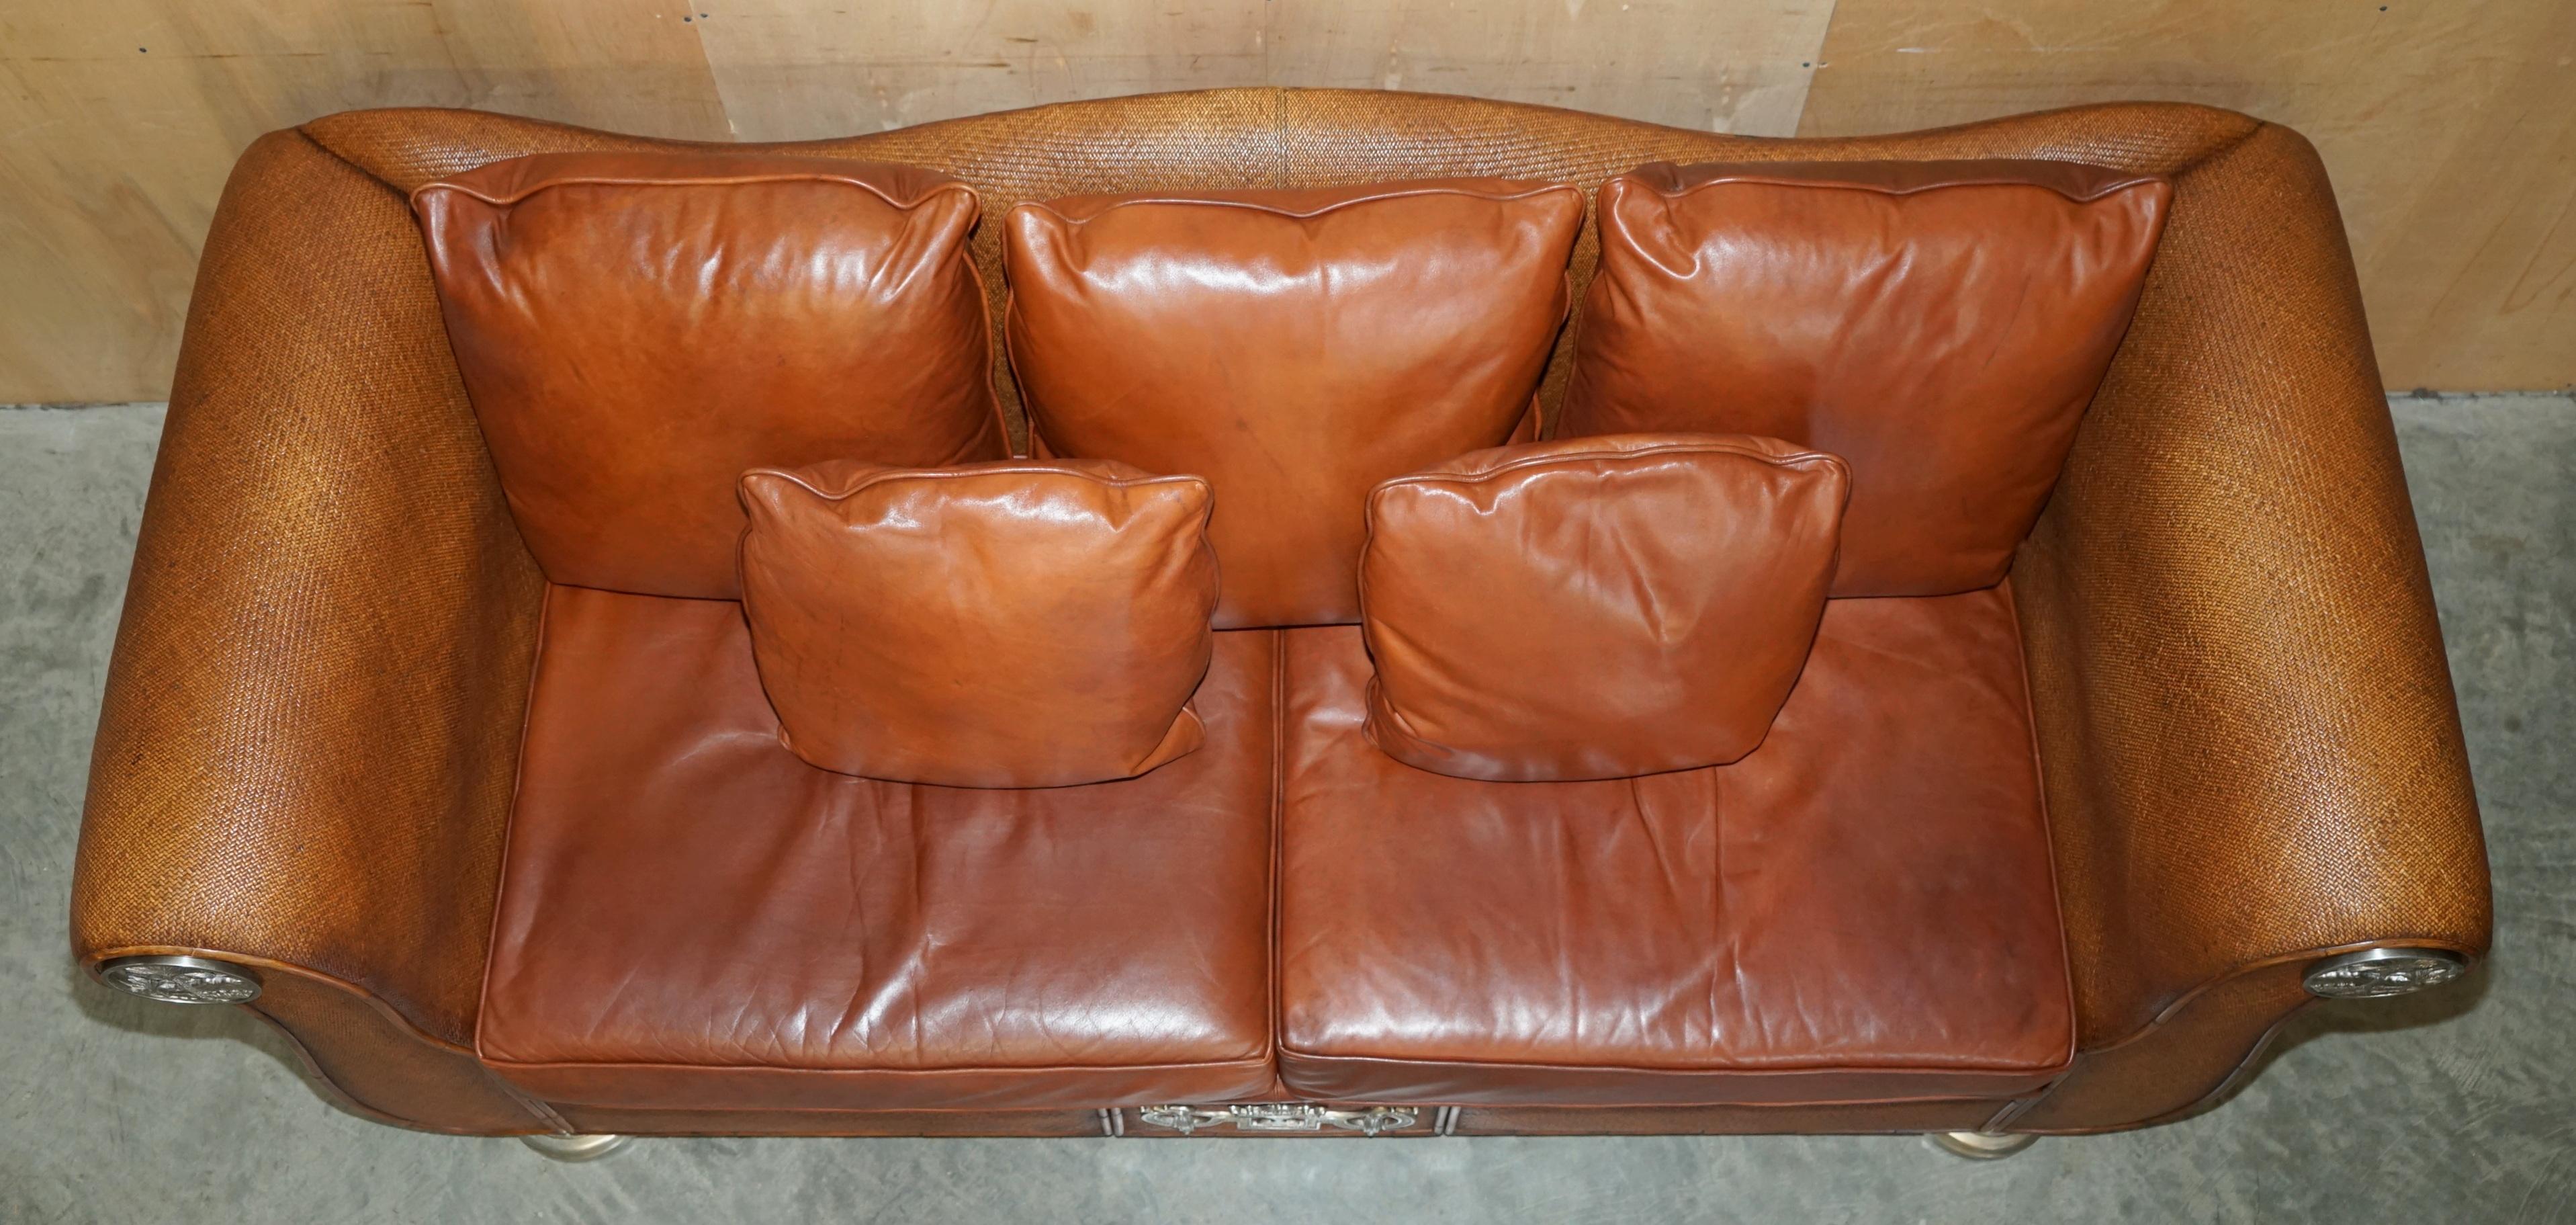 RARE PAIR OF THOMASVILLE SAFARI BROWN LEATHER WOVEN SOFAS PART OF LARGE SUITe For Sale 2